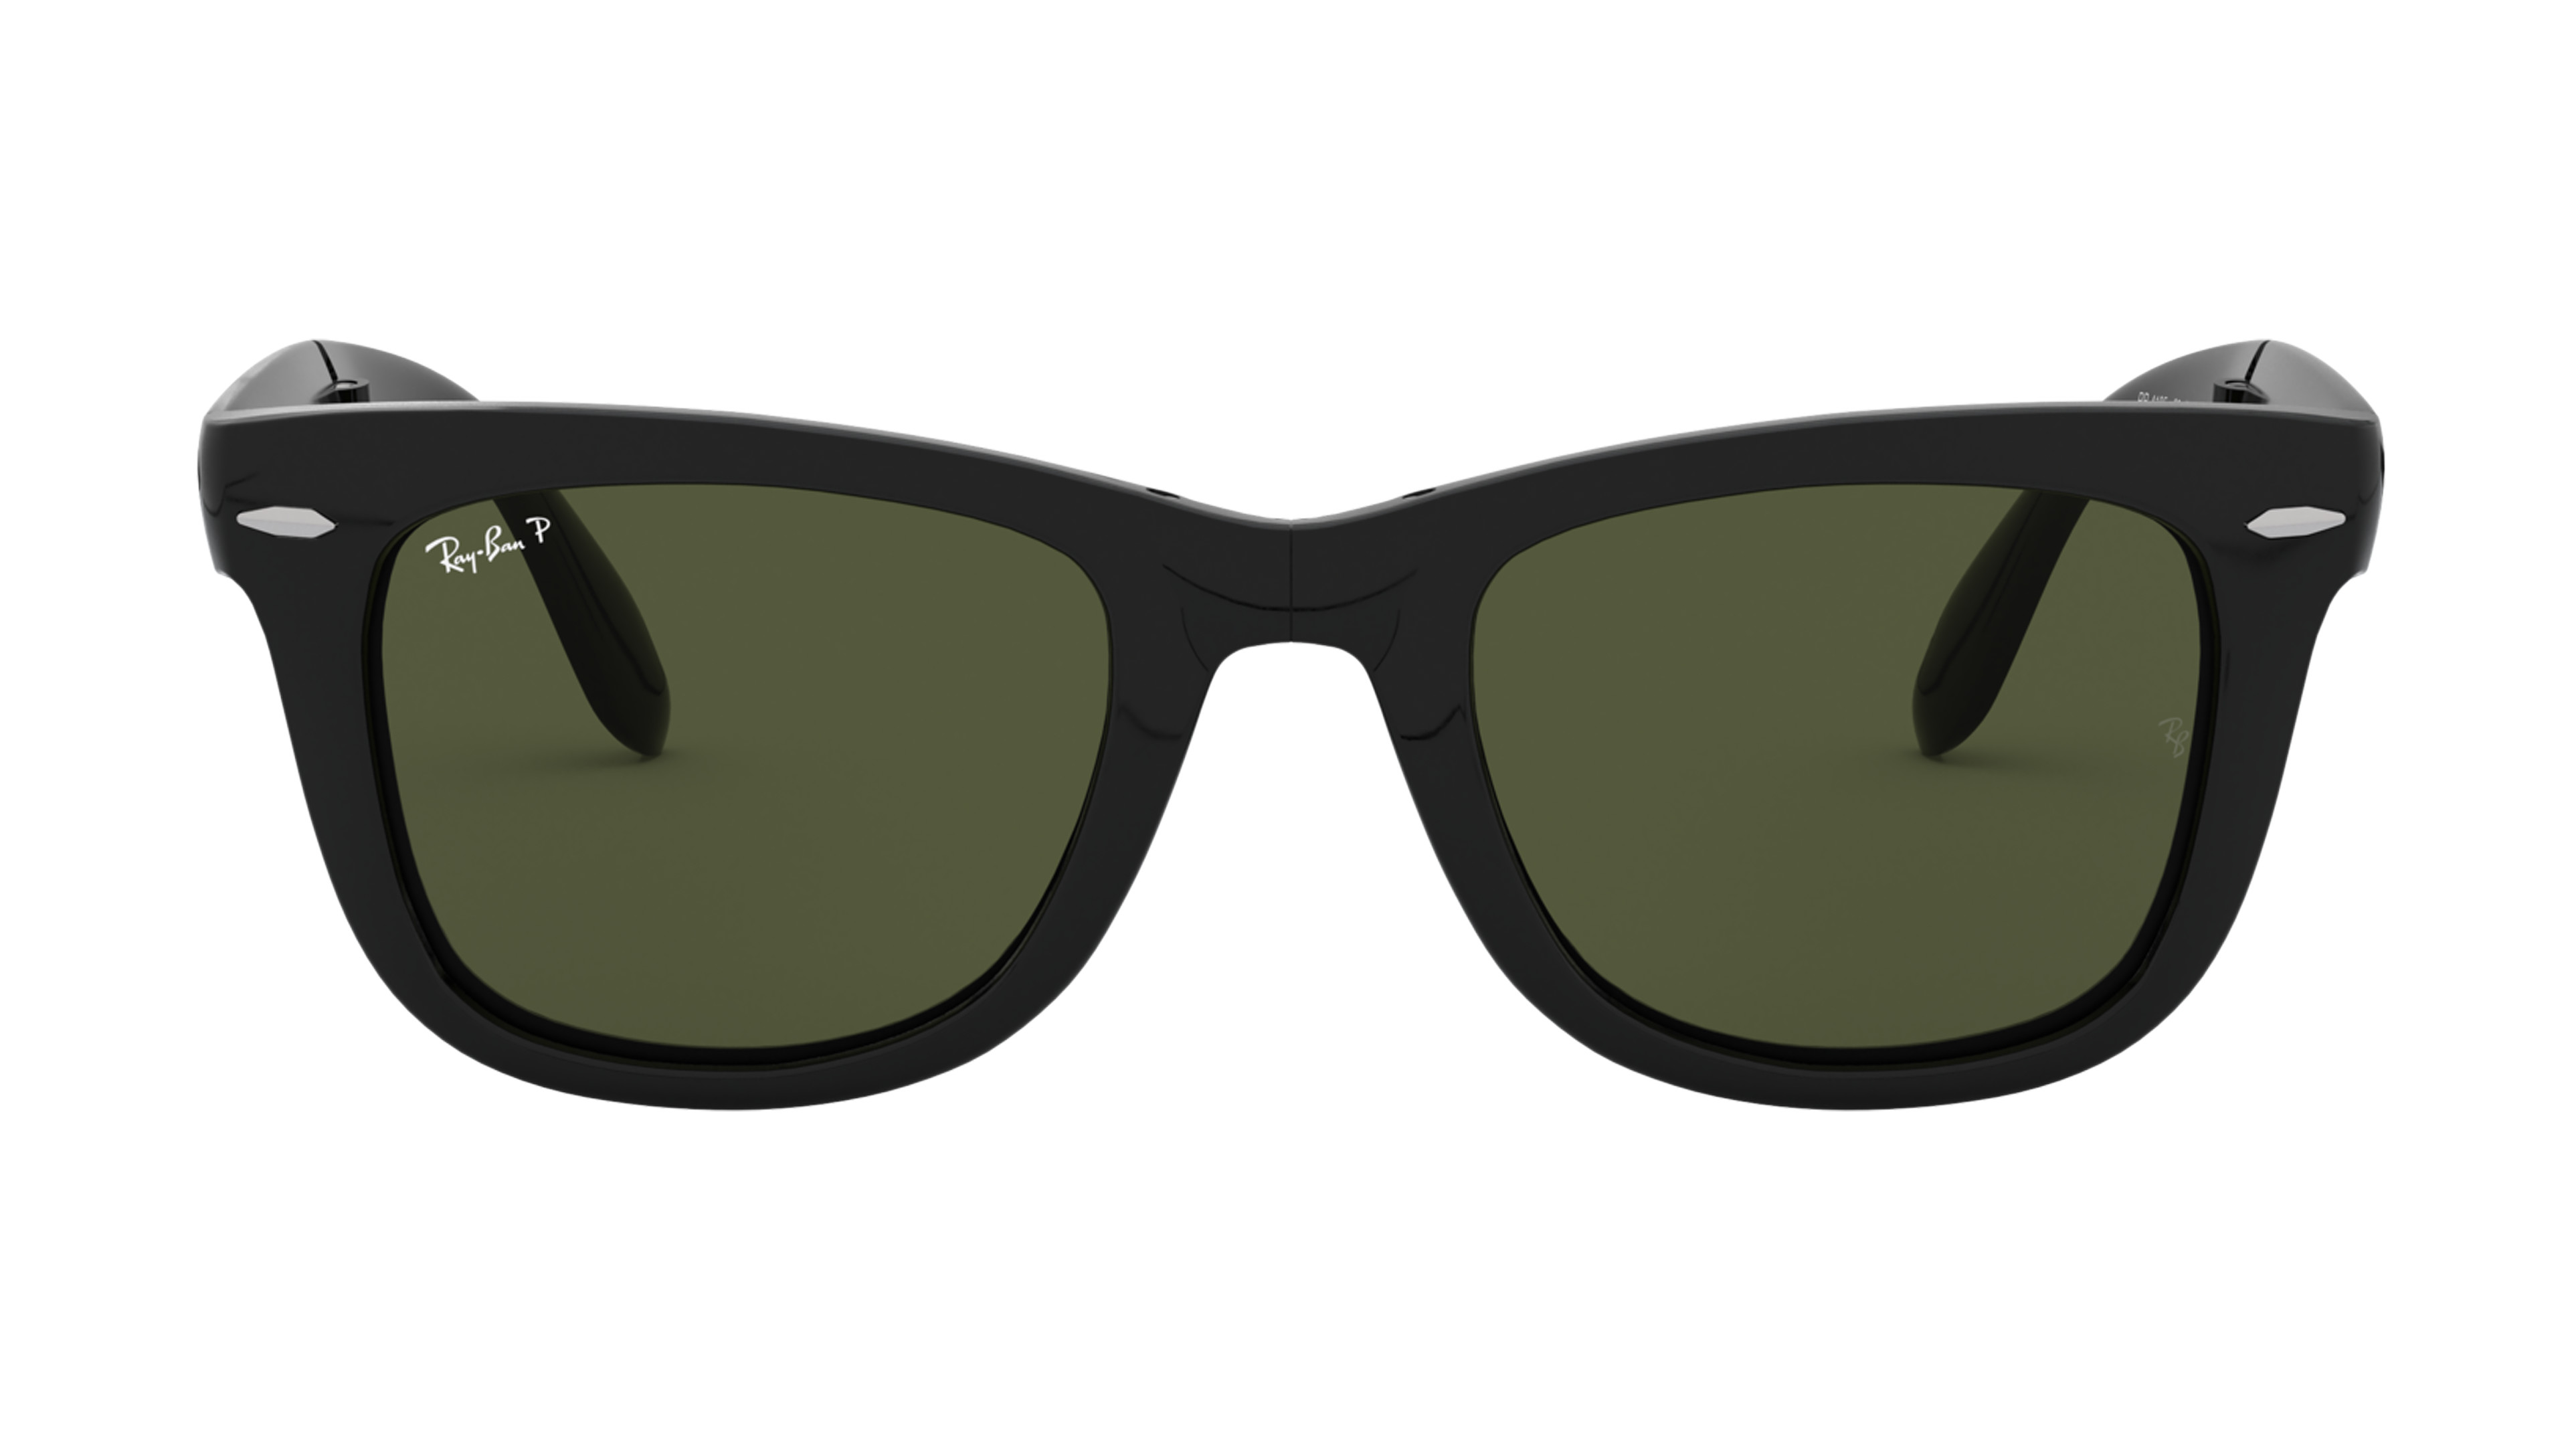 [products.image.front] Ray-Ban FOLDING WAYFARER 0RB4105 601/58 Sonnenbrille